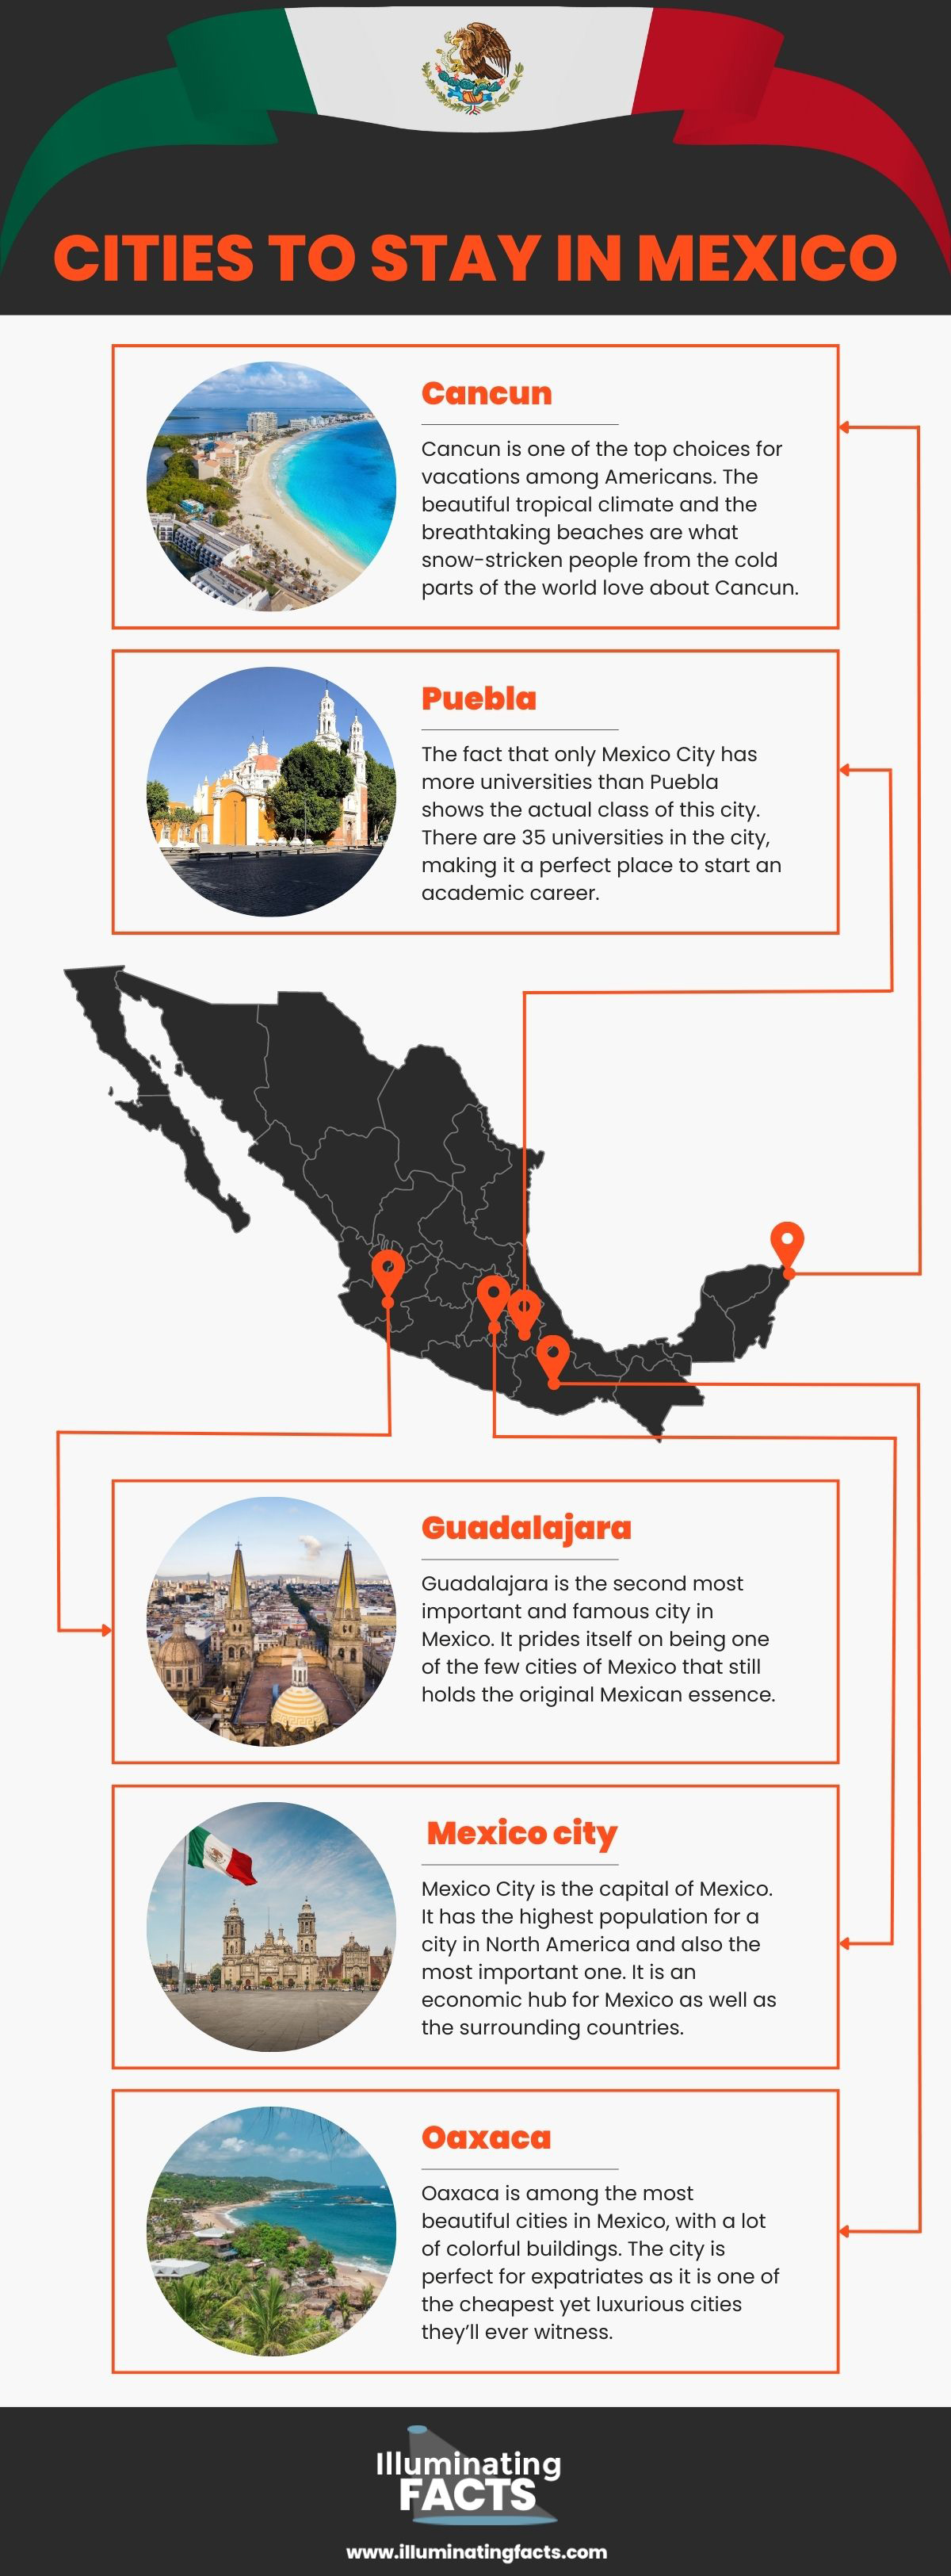 Cities to Stay in Mexico